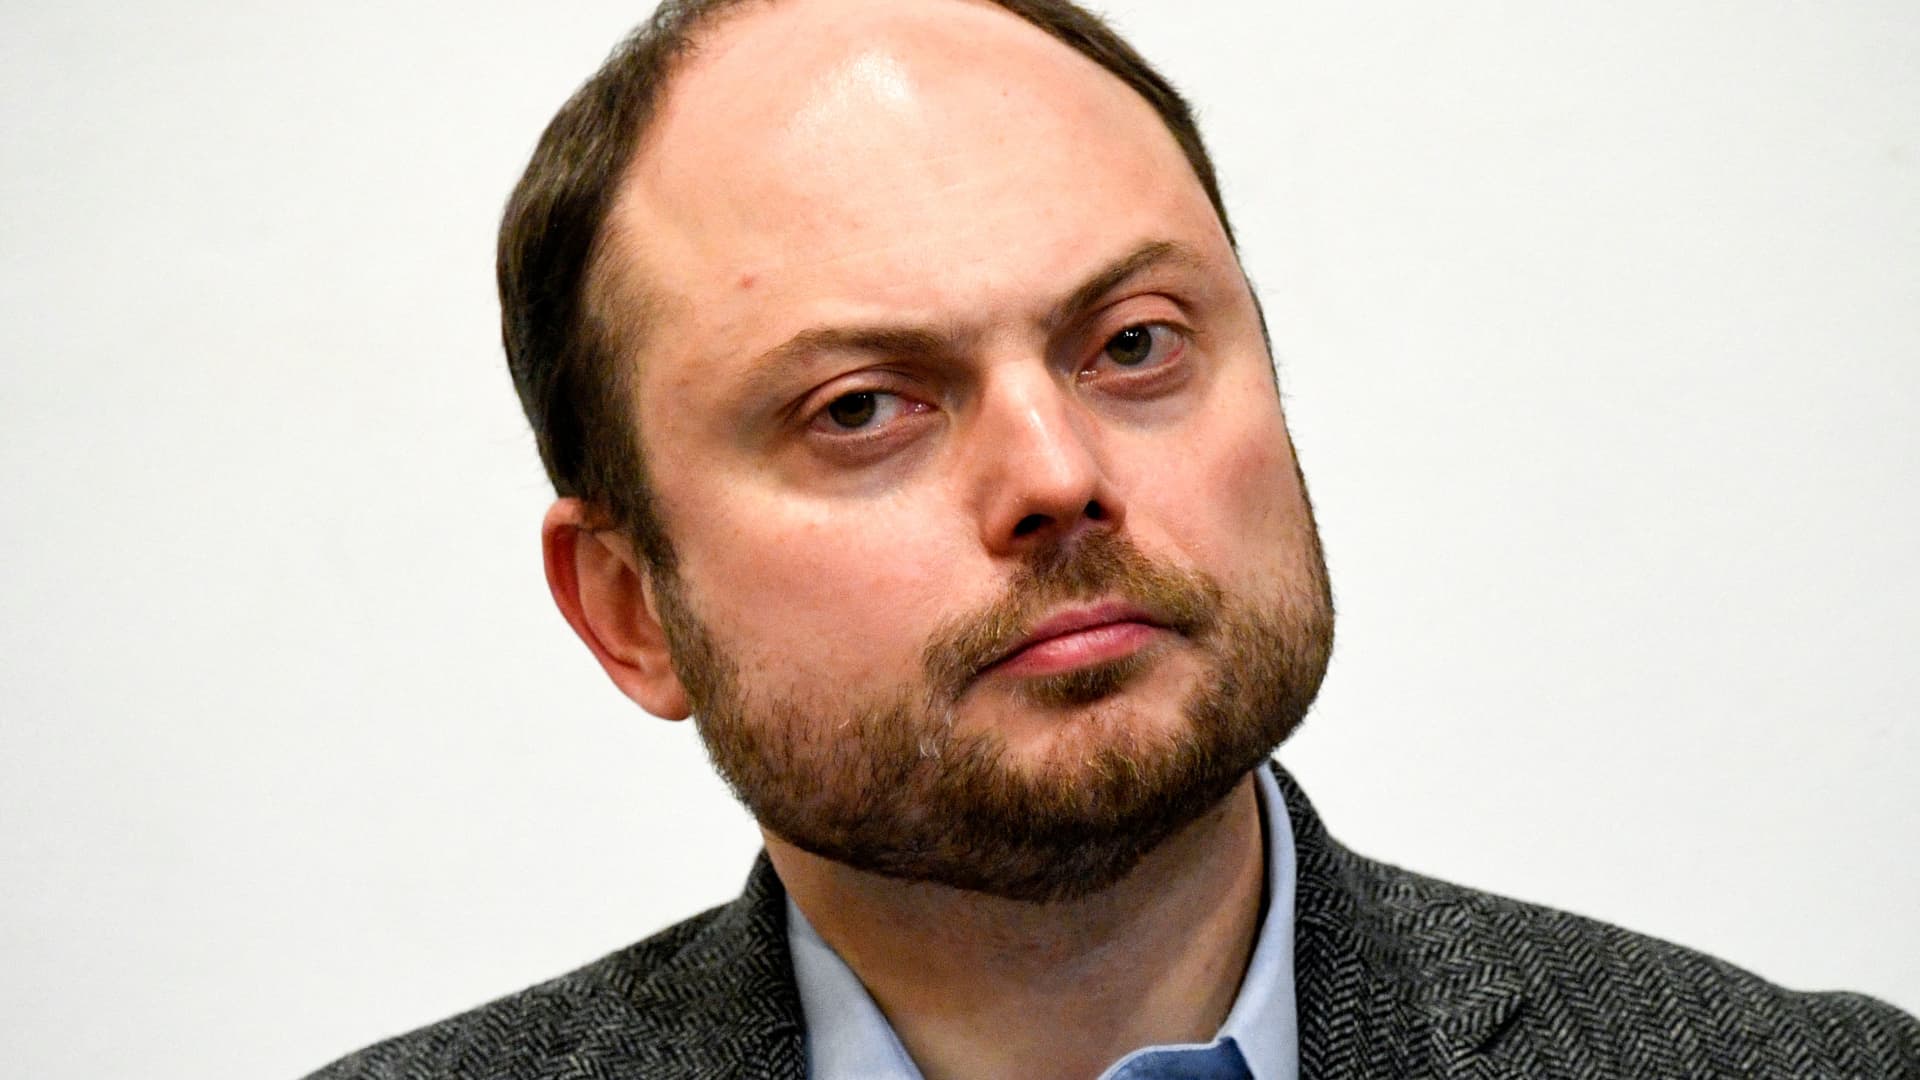 Russian journalist and activist Vladimir Kara-Murza attends a conference of Russia's leading rights group Memorial in Moscow on October 27, 2021.